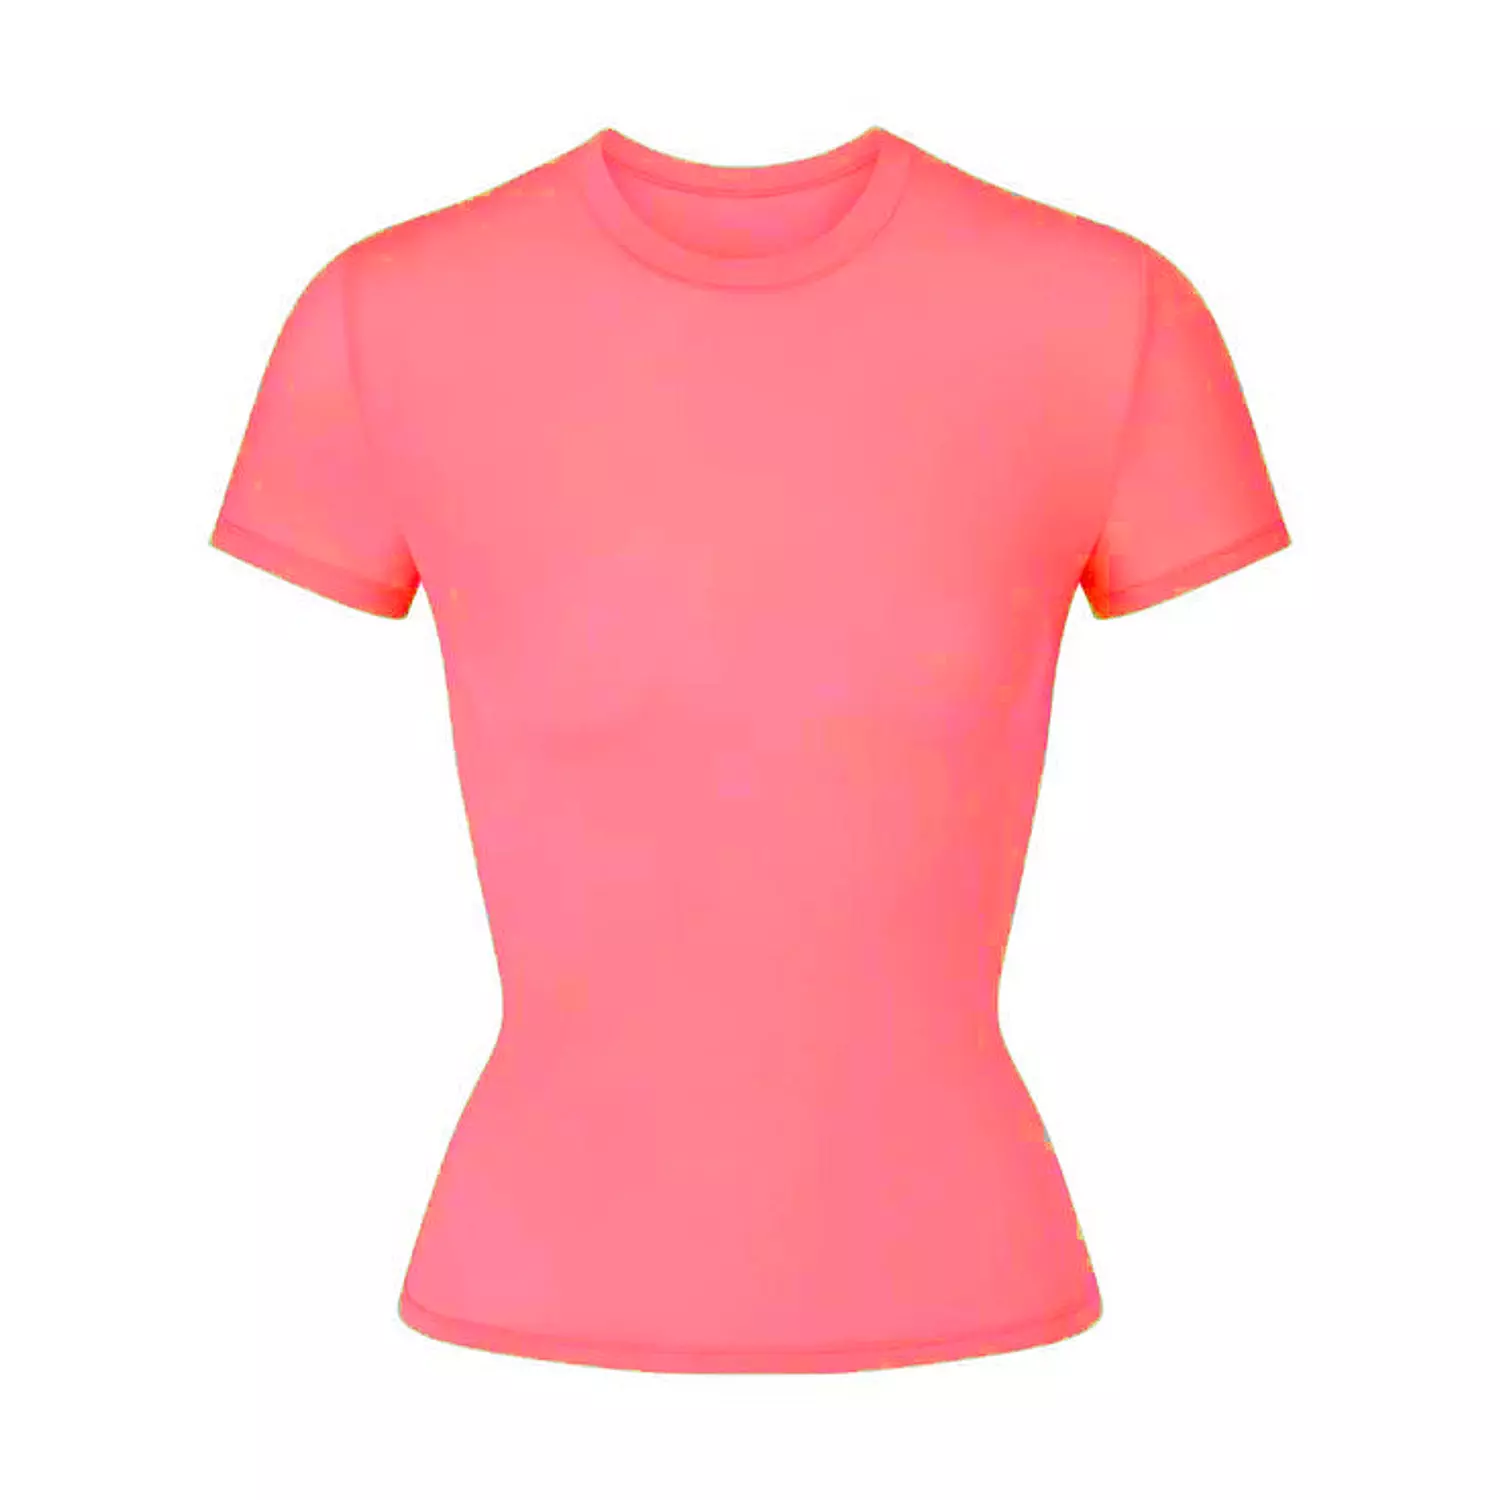 Hot Pink Basic Top hover image